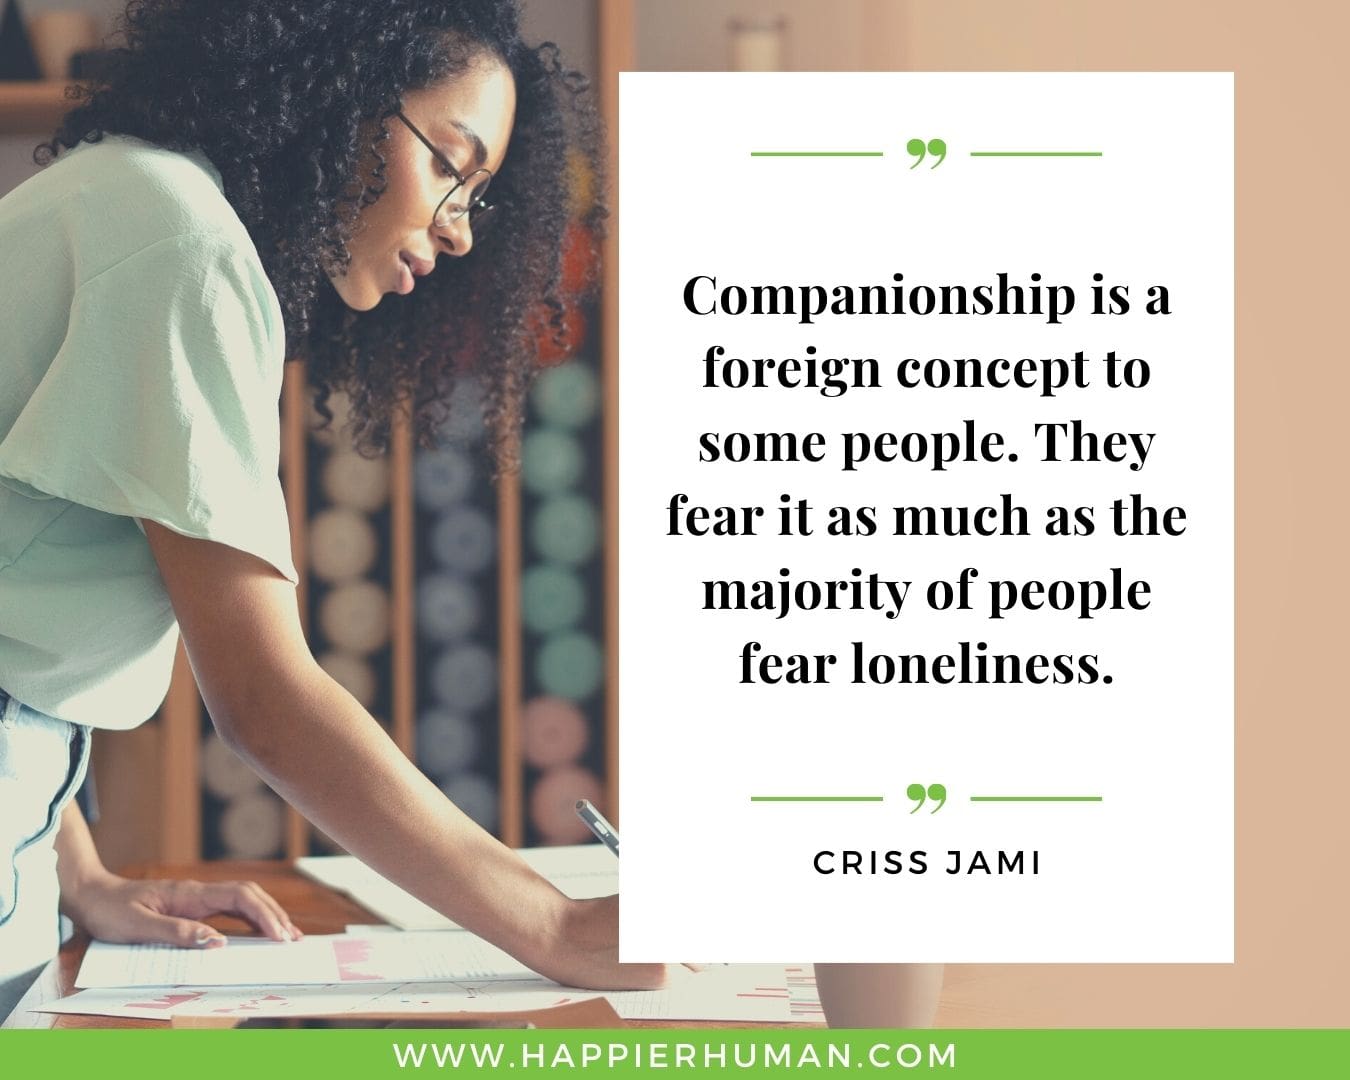 Introvert Quotes - “Companionship is a foreign concept to some people. They fear it as much as the majority of people fear loneliness.” – Criss Jami